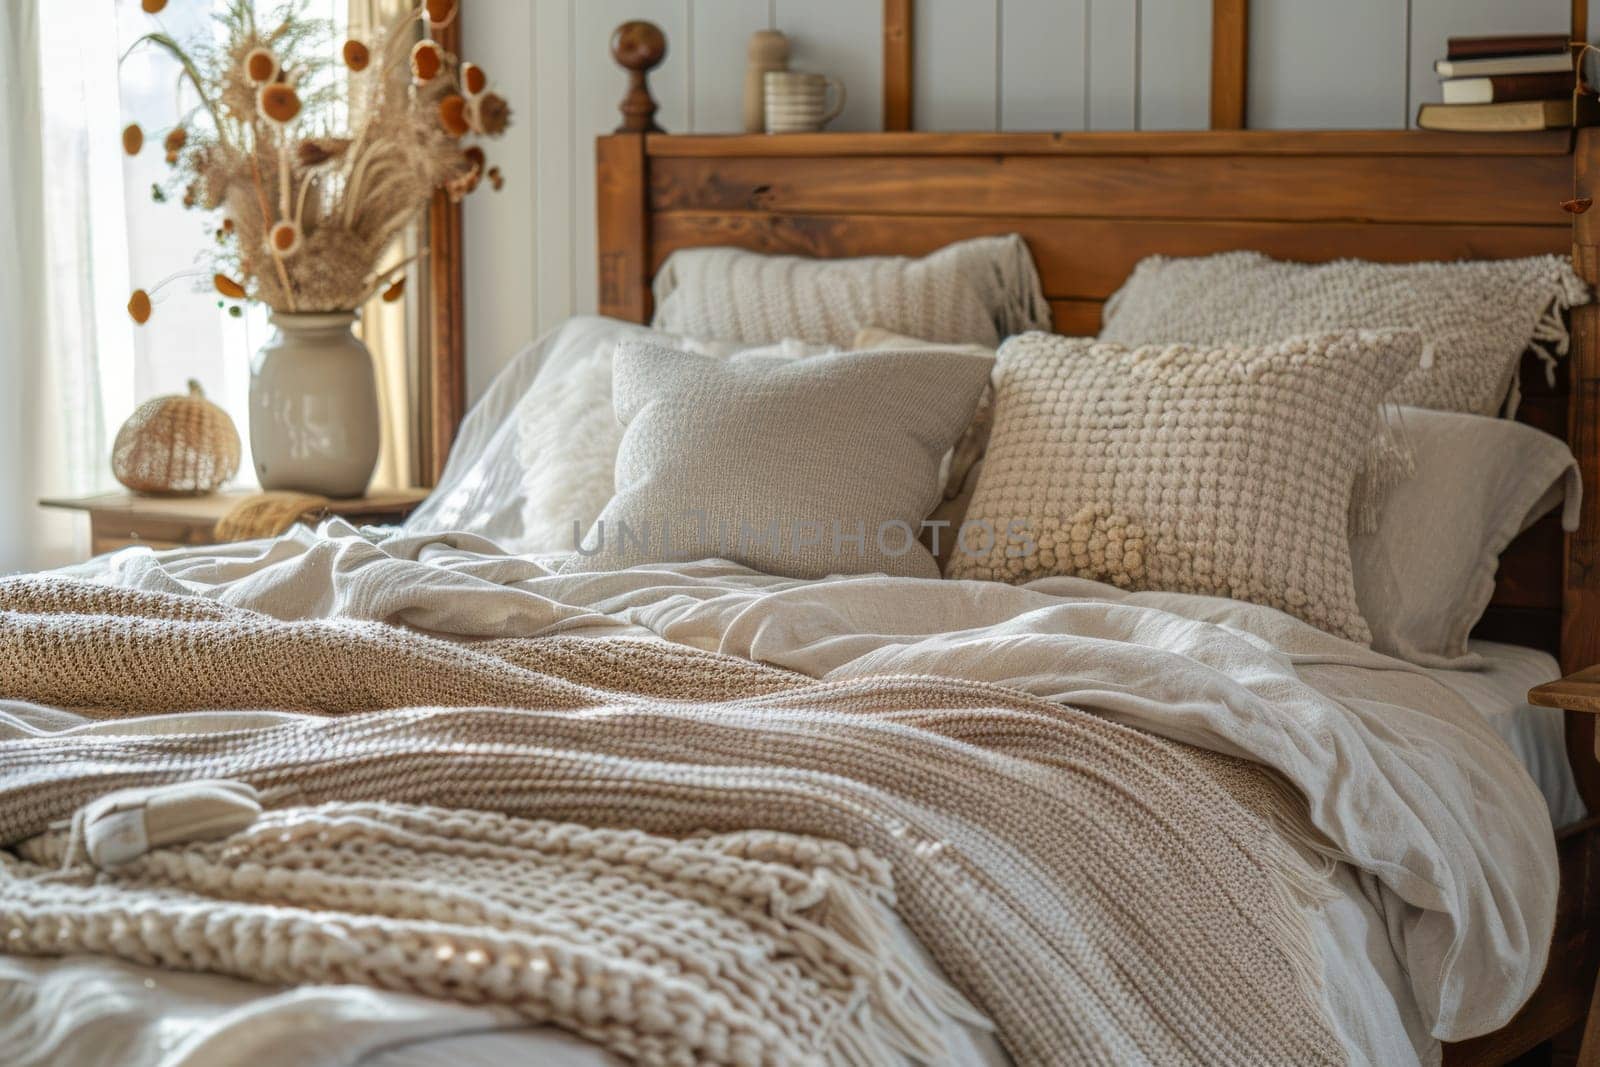 A bed with a white comforter and pillows, and a vase of flowers on a nightstand.